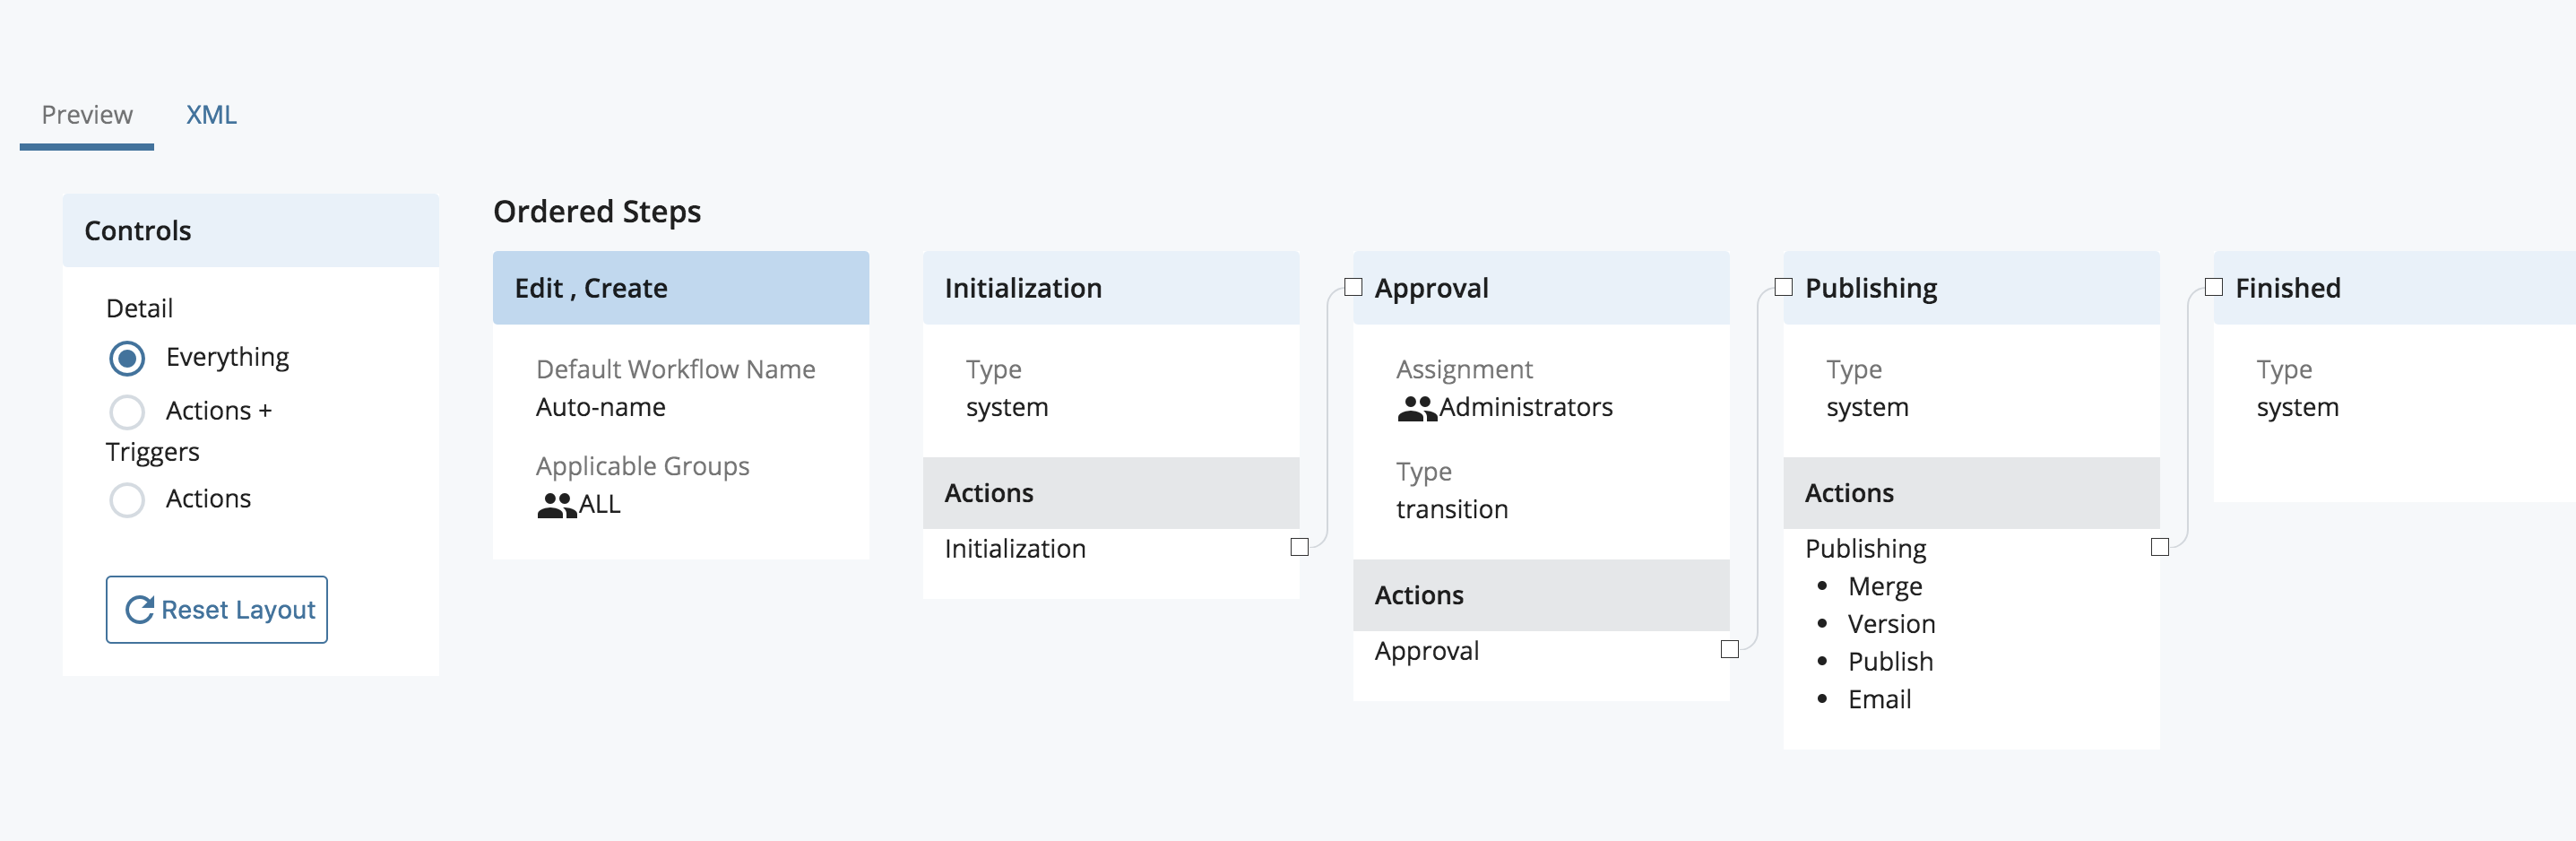 Workflow Definition Preview